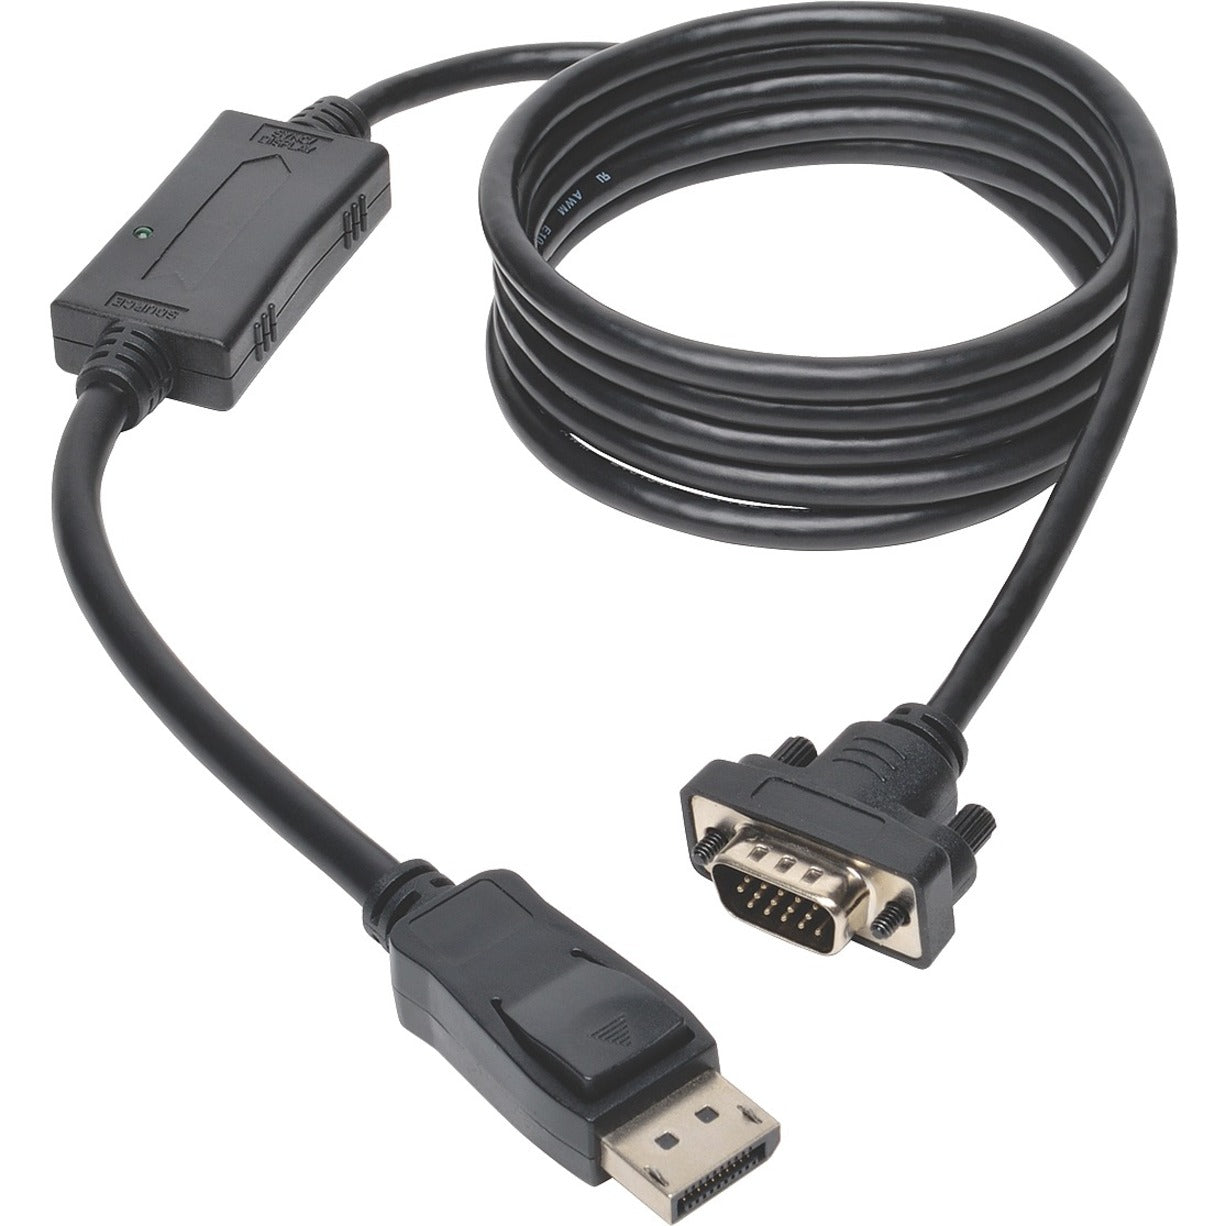 Tripp Lite P581-006-VGA-V2 DisplayPort 1.2 to VGA Active Adapter Cable, 6 ft. - High Definition Video Transmission